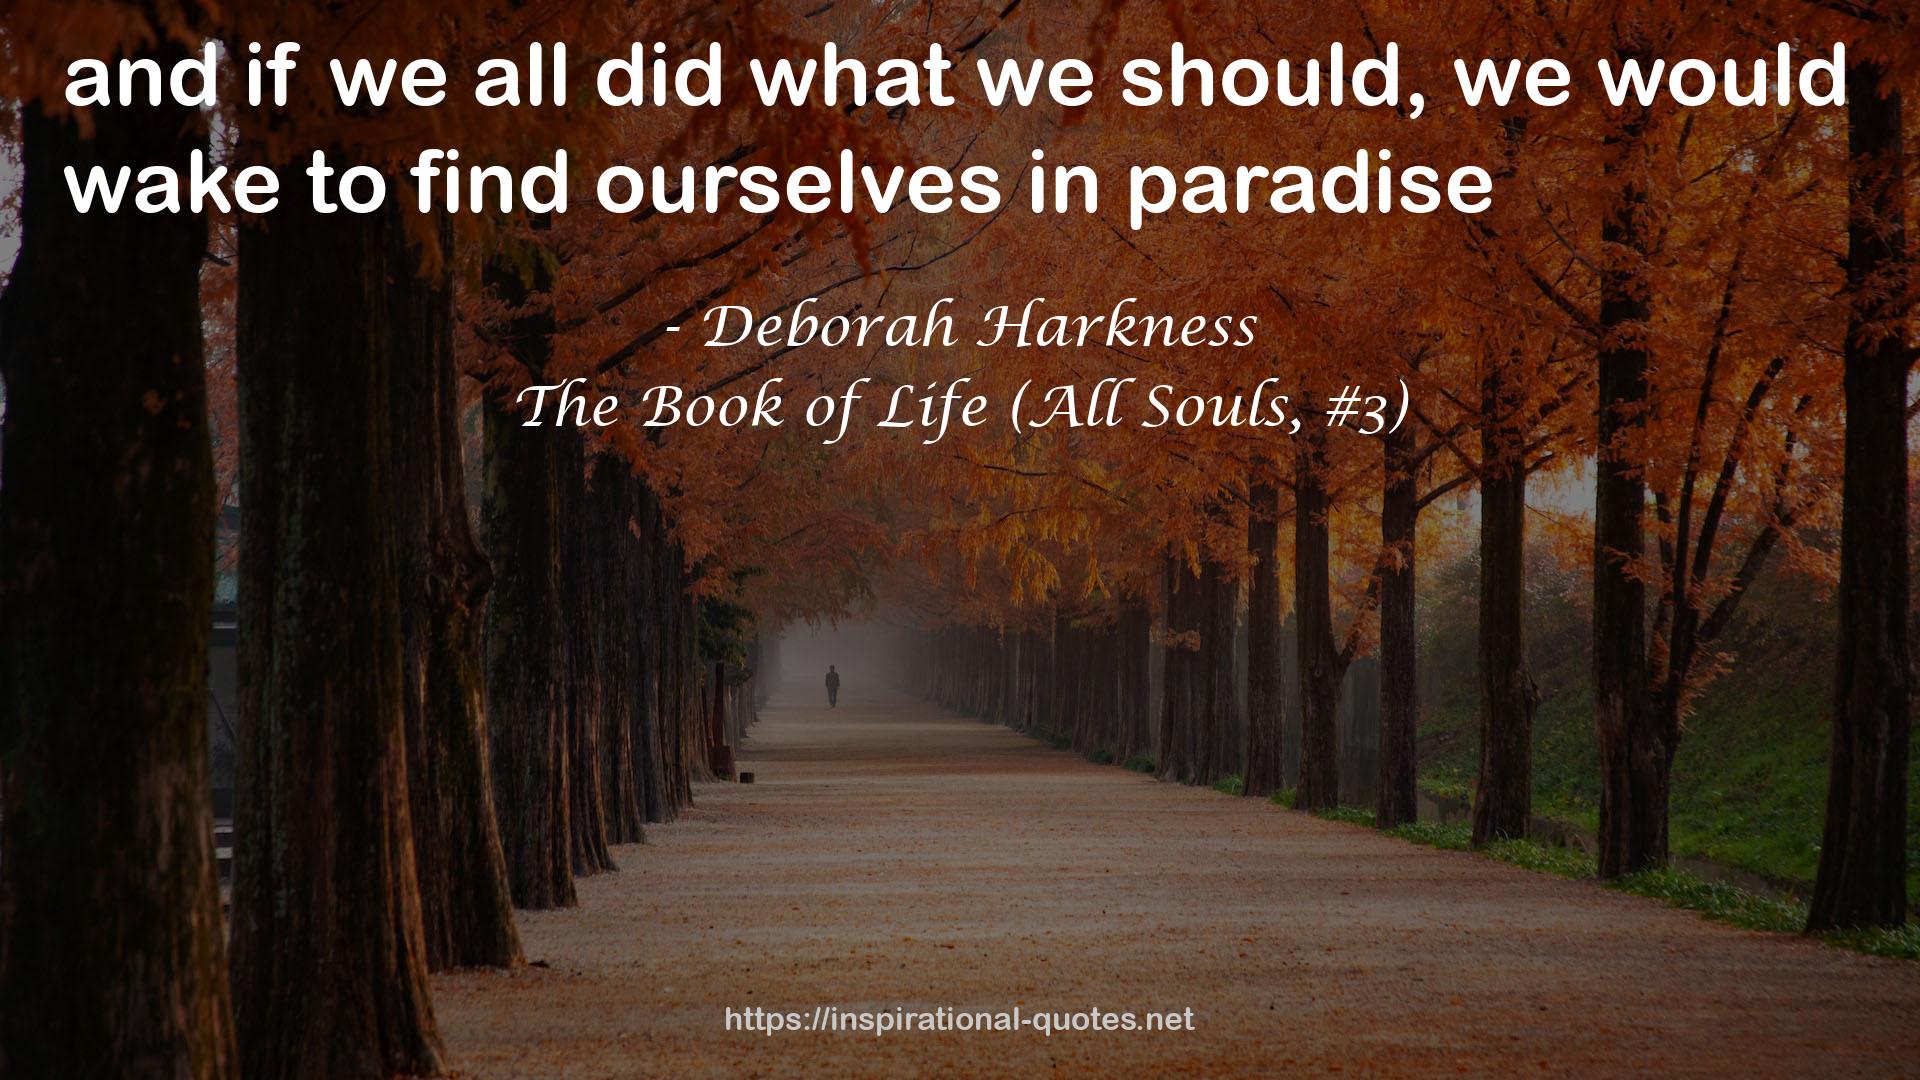 The Book of Life (All Souls, #3) QUOTES